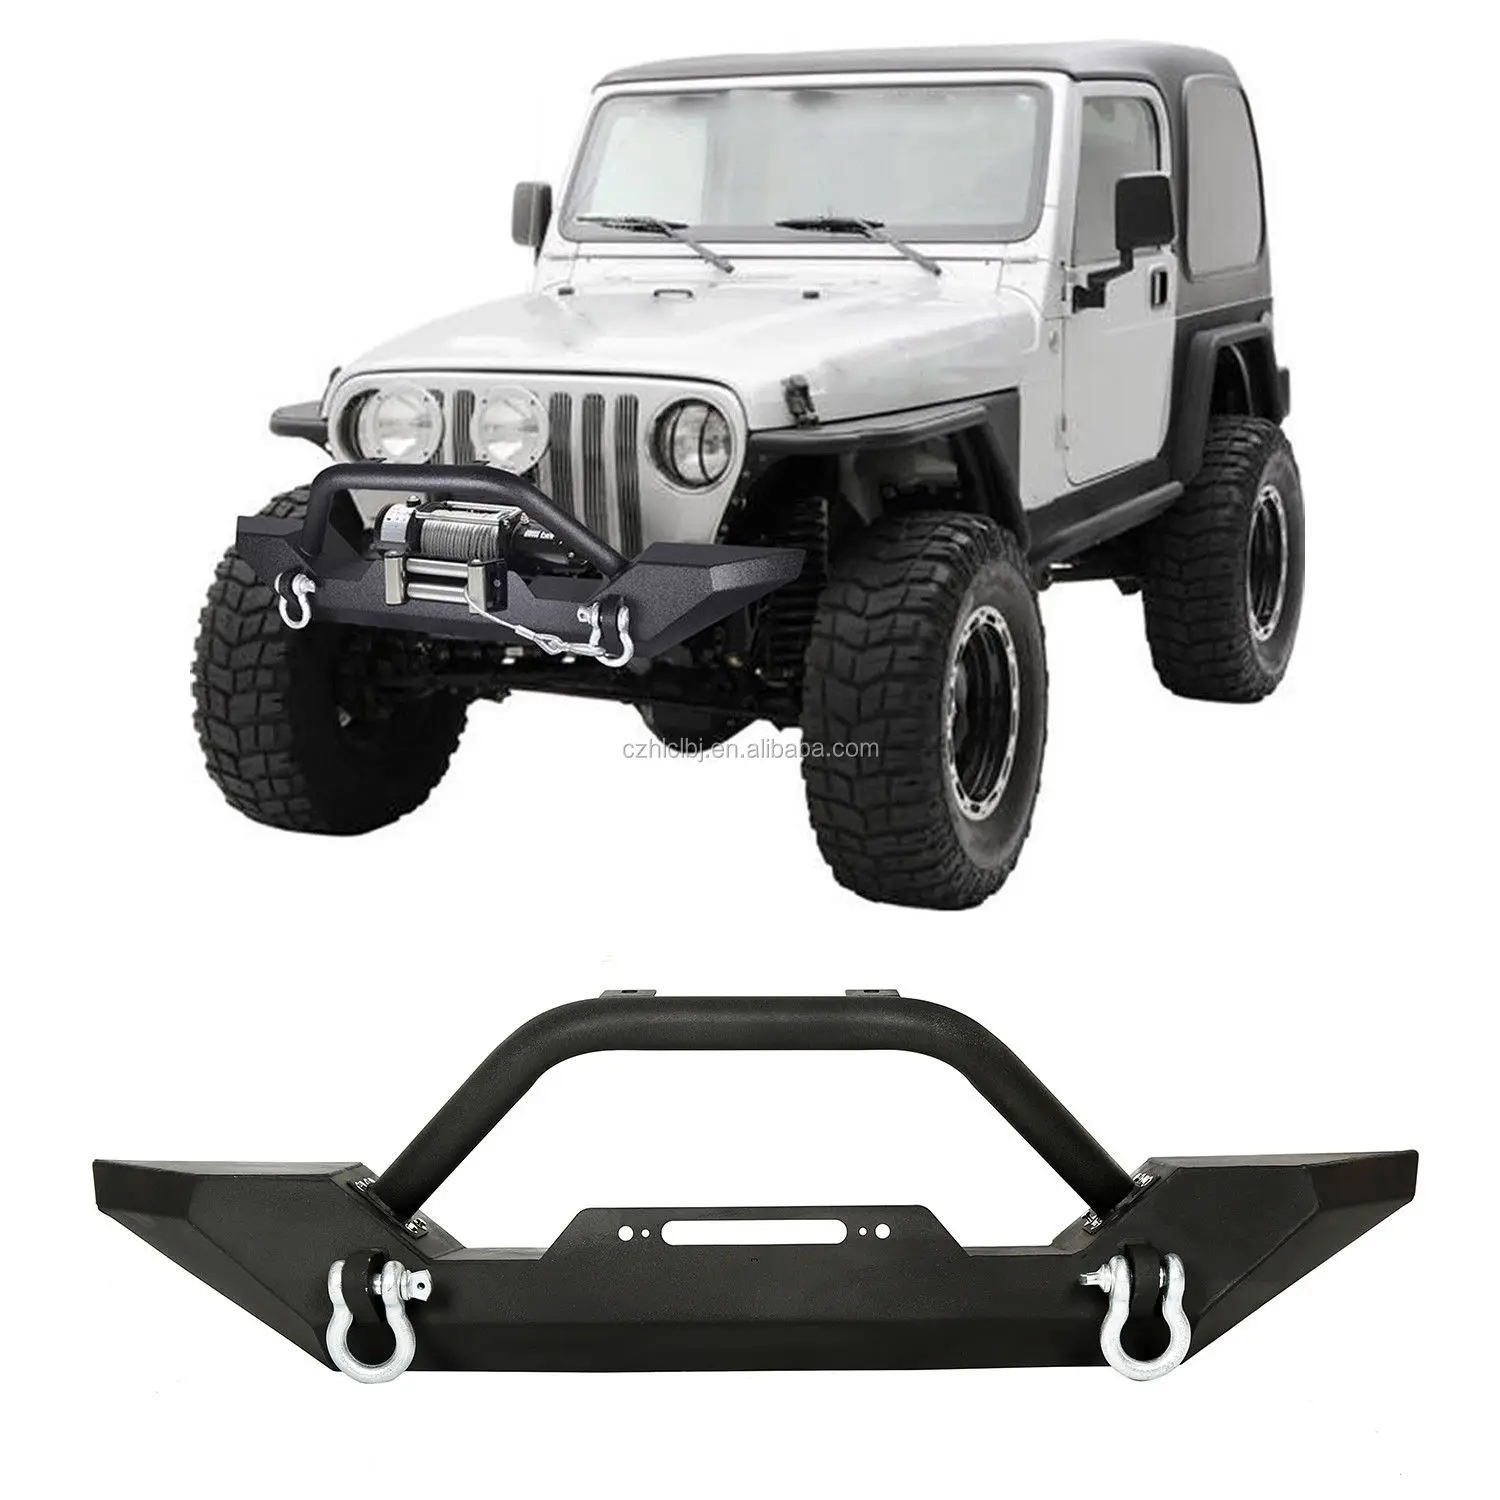 Ca-110 Front Bumper Winch Plate D-ring Black For 86-06 Jeep Wrangler Tj Yj  - Buy Front Bumper For Jeep Wrangler Jk,Front Bumper,Bumper Product on  